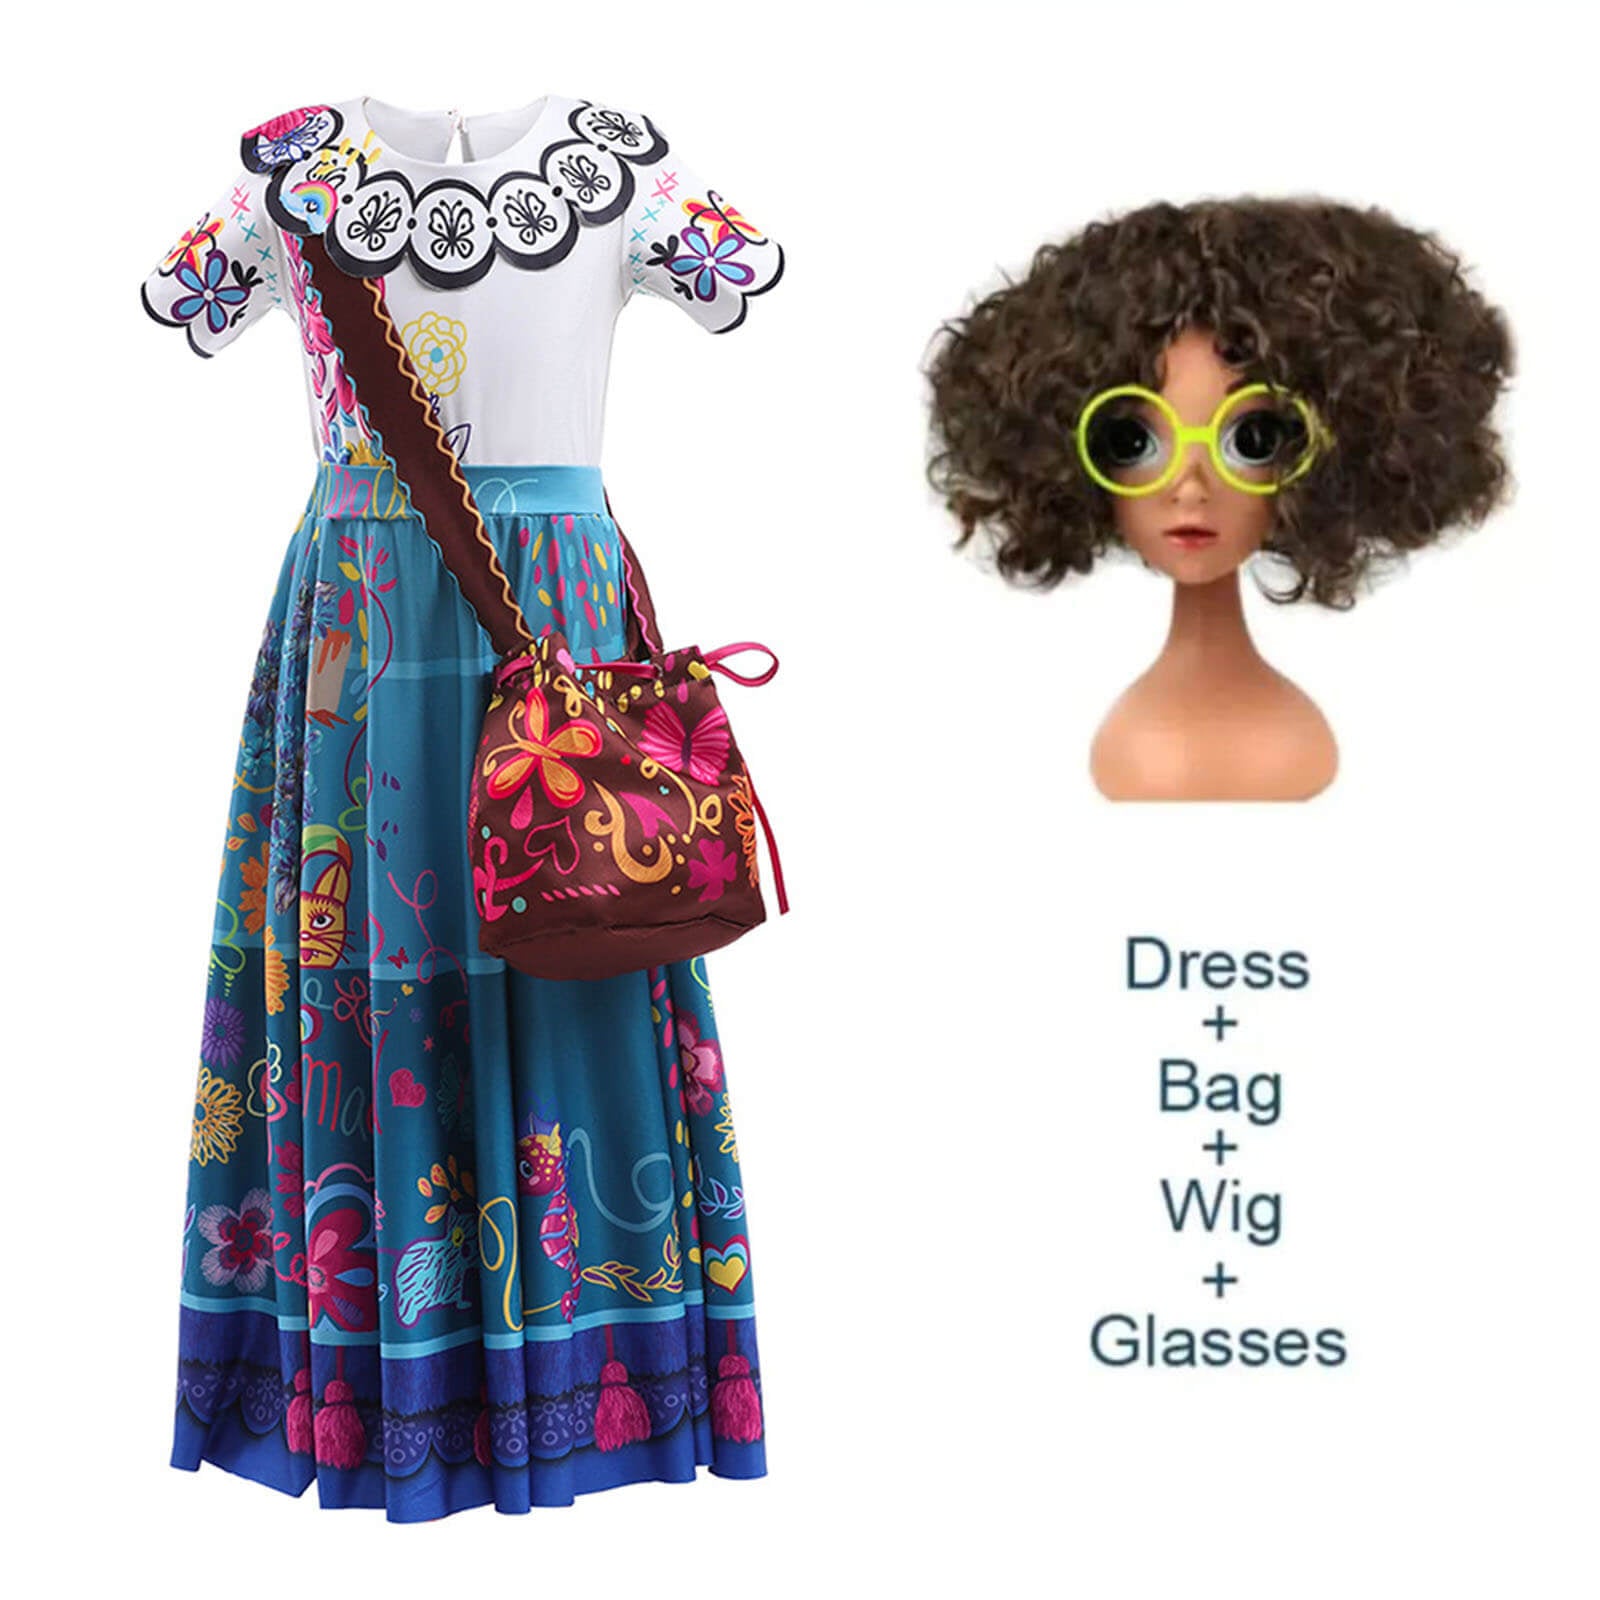 Kids Princess Dress with Bag and Wig Glasses Girl's Magical Mardrigal Costume Full Set